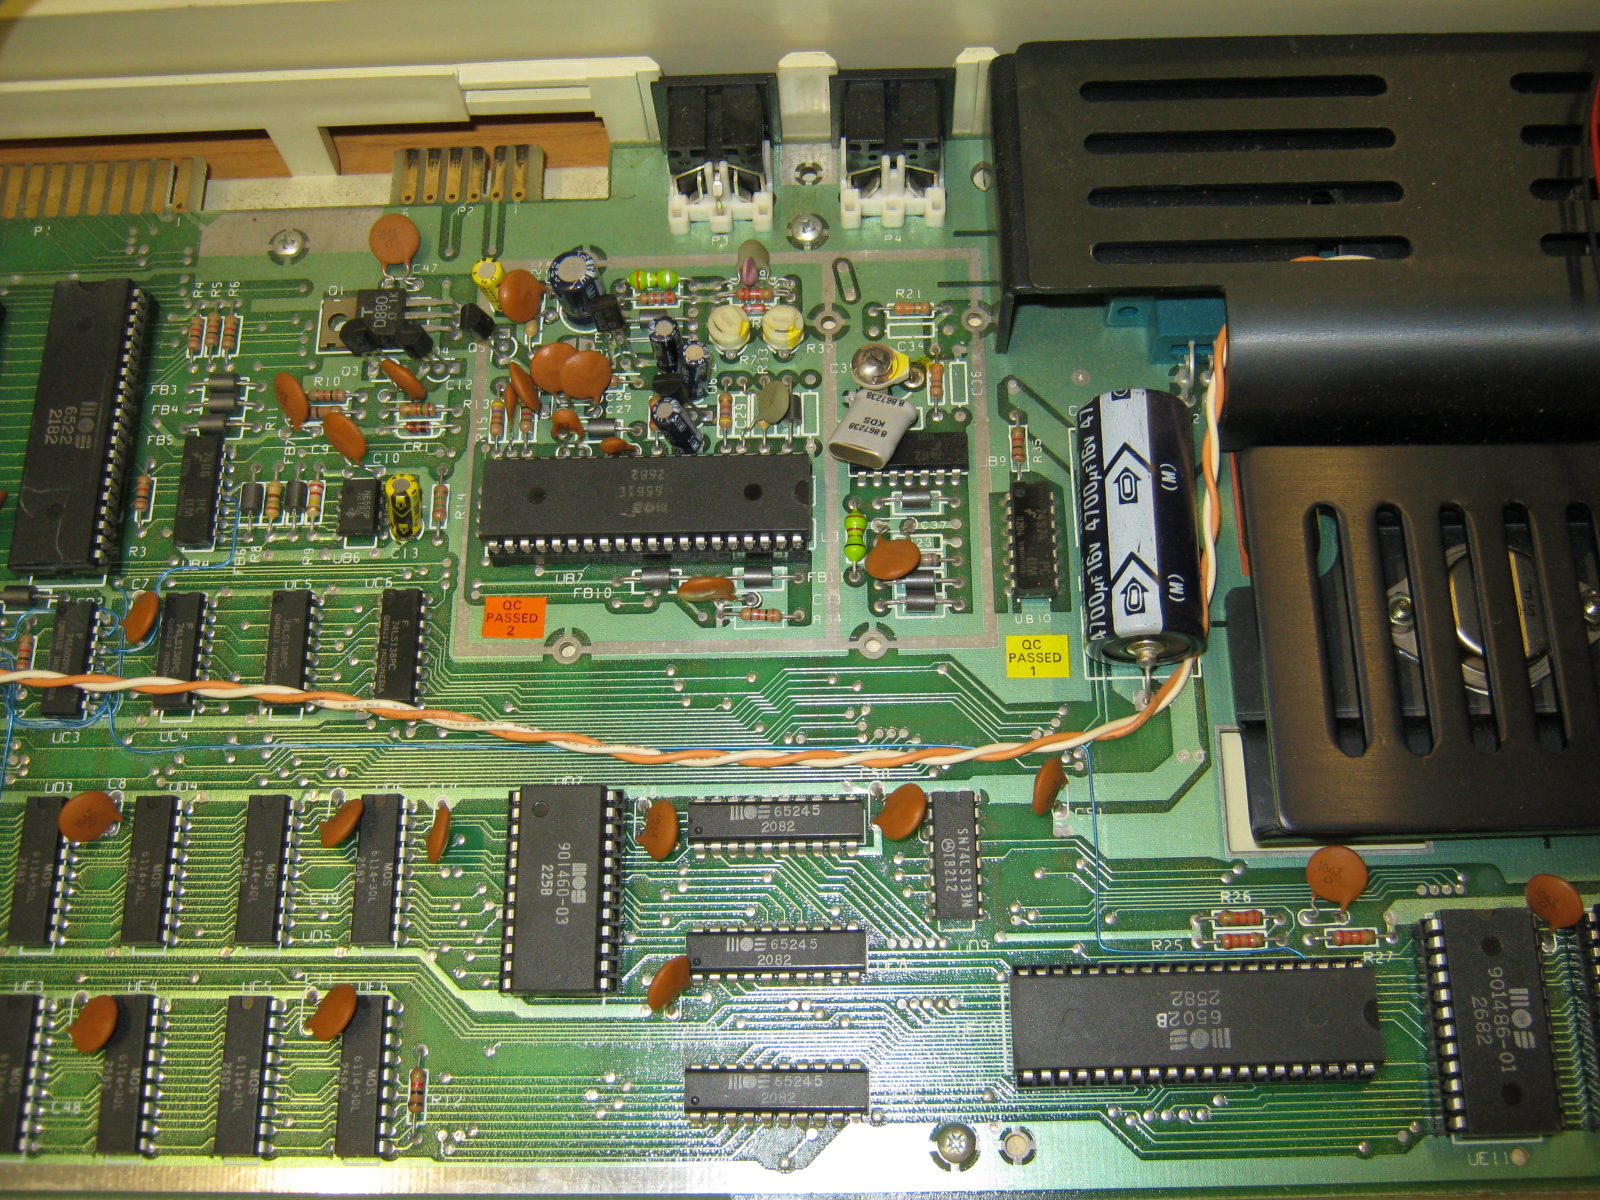 http://museodelcomputer.org/parts/commodore/VIC20_2/IMG_5268.jpg